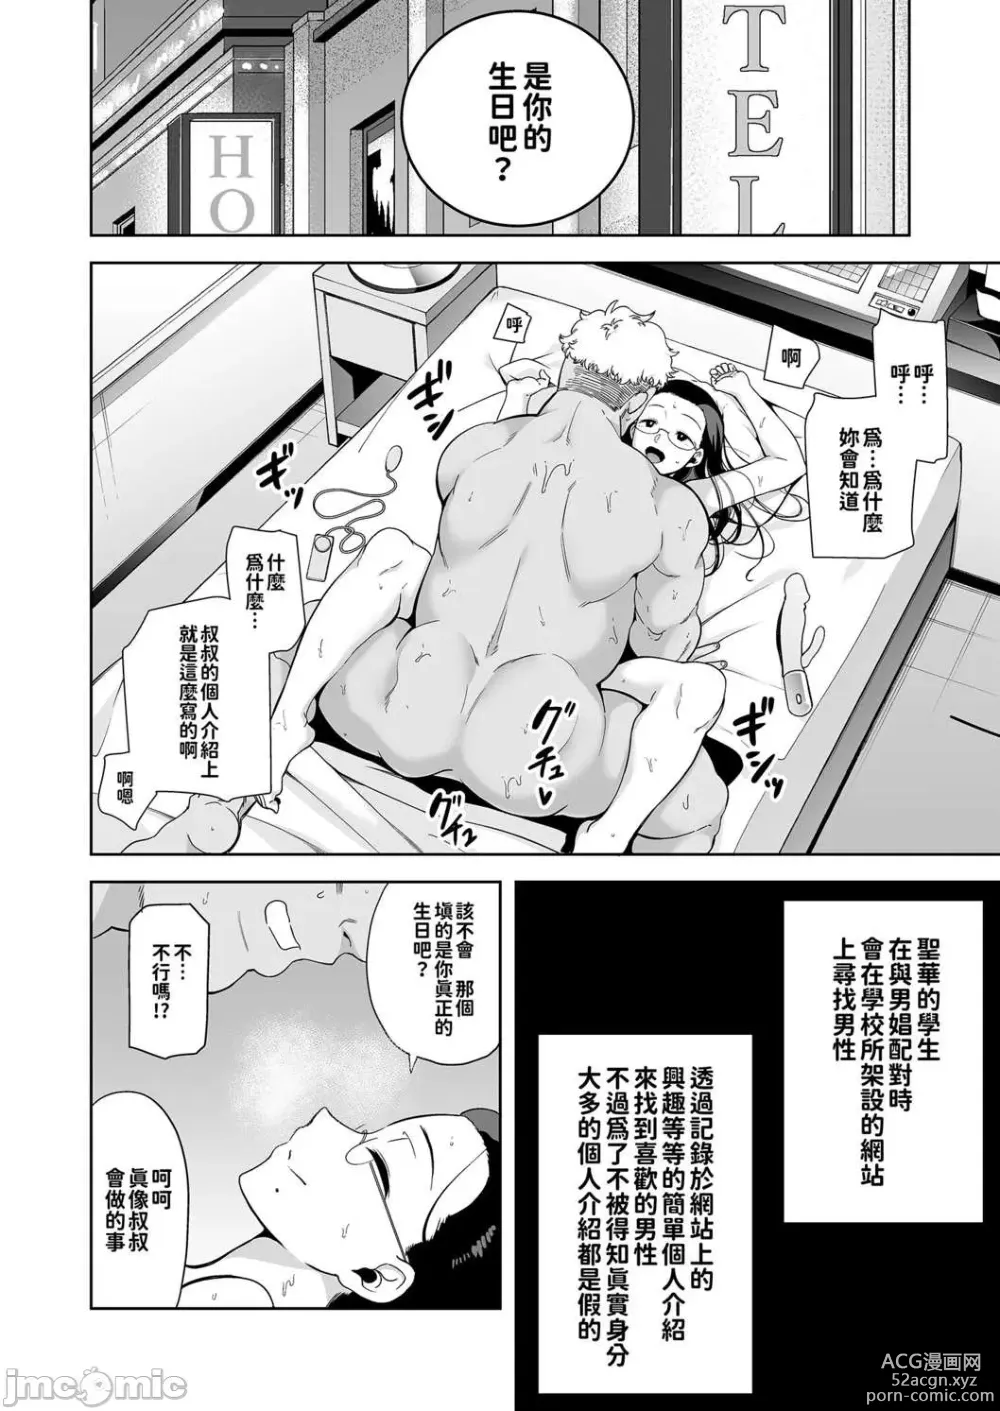 Page 4 of doujinshi 聖華女学院高等部公認竿おじさん 3